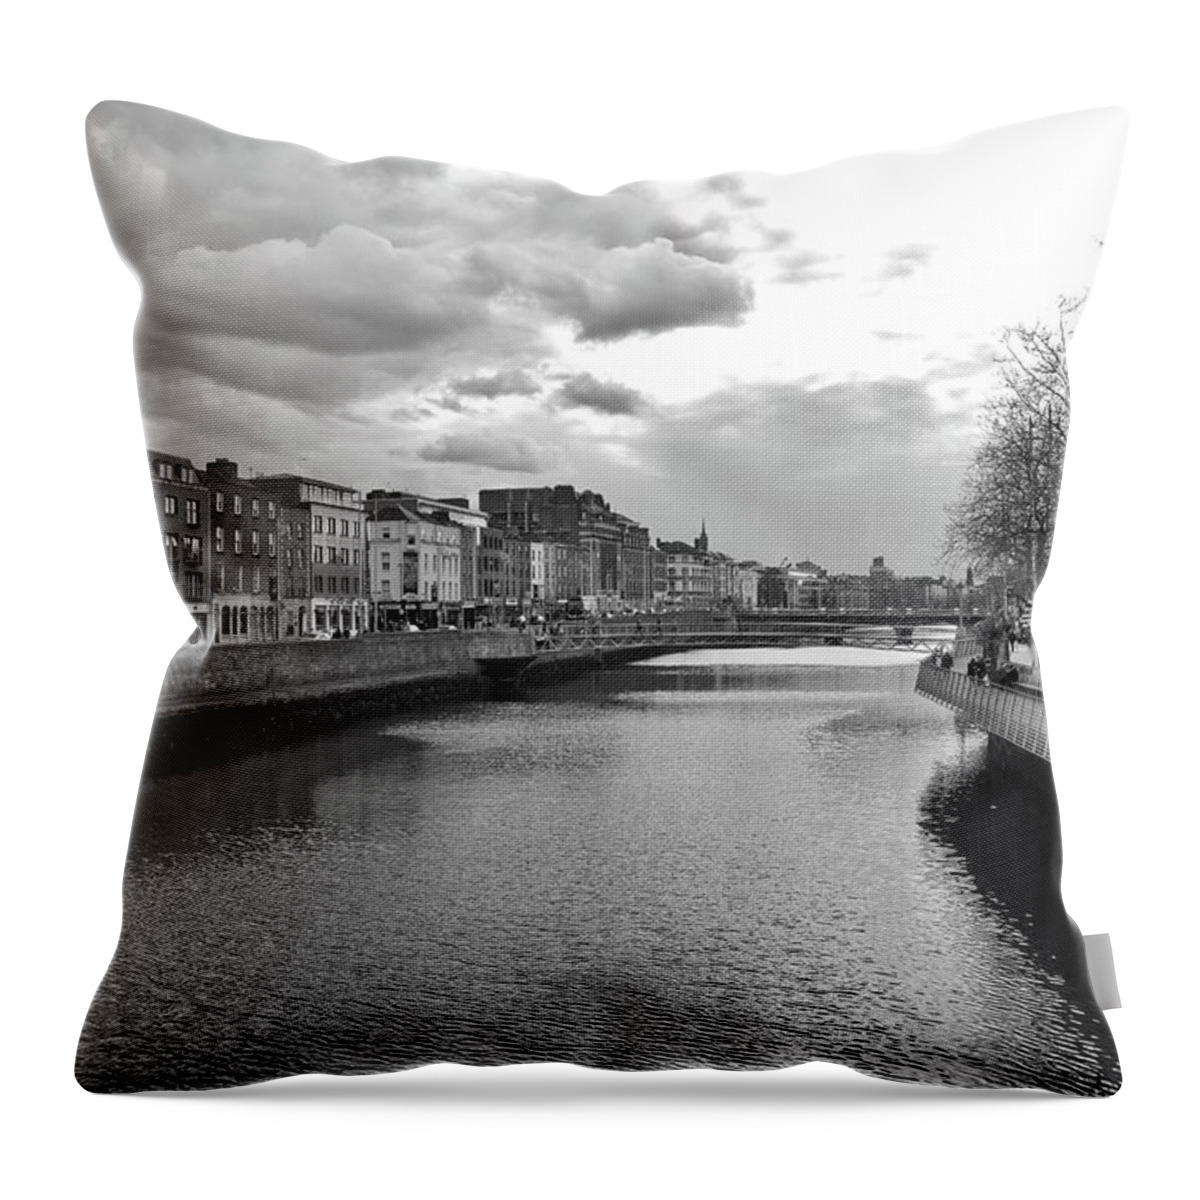 River Liffey Throw Pillow featuring the photograph The River Liffey by Marisa Geraghty Photography